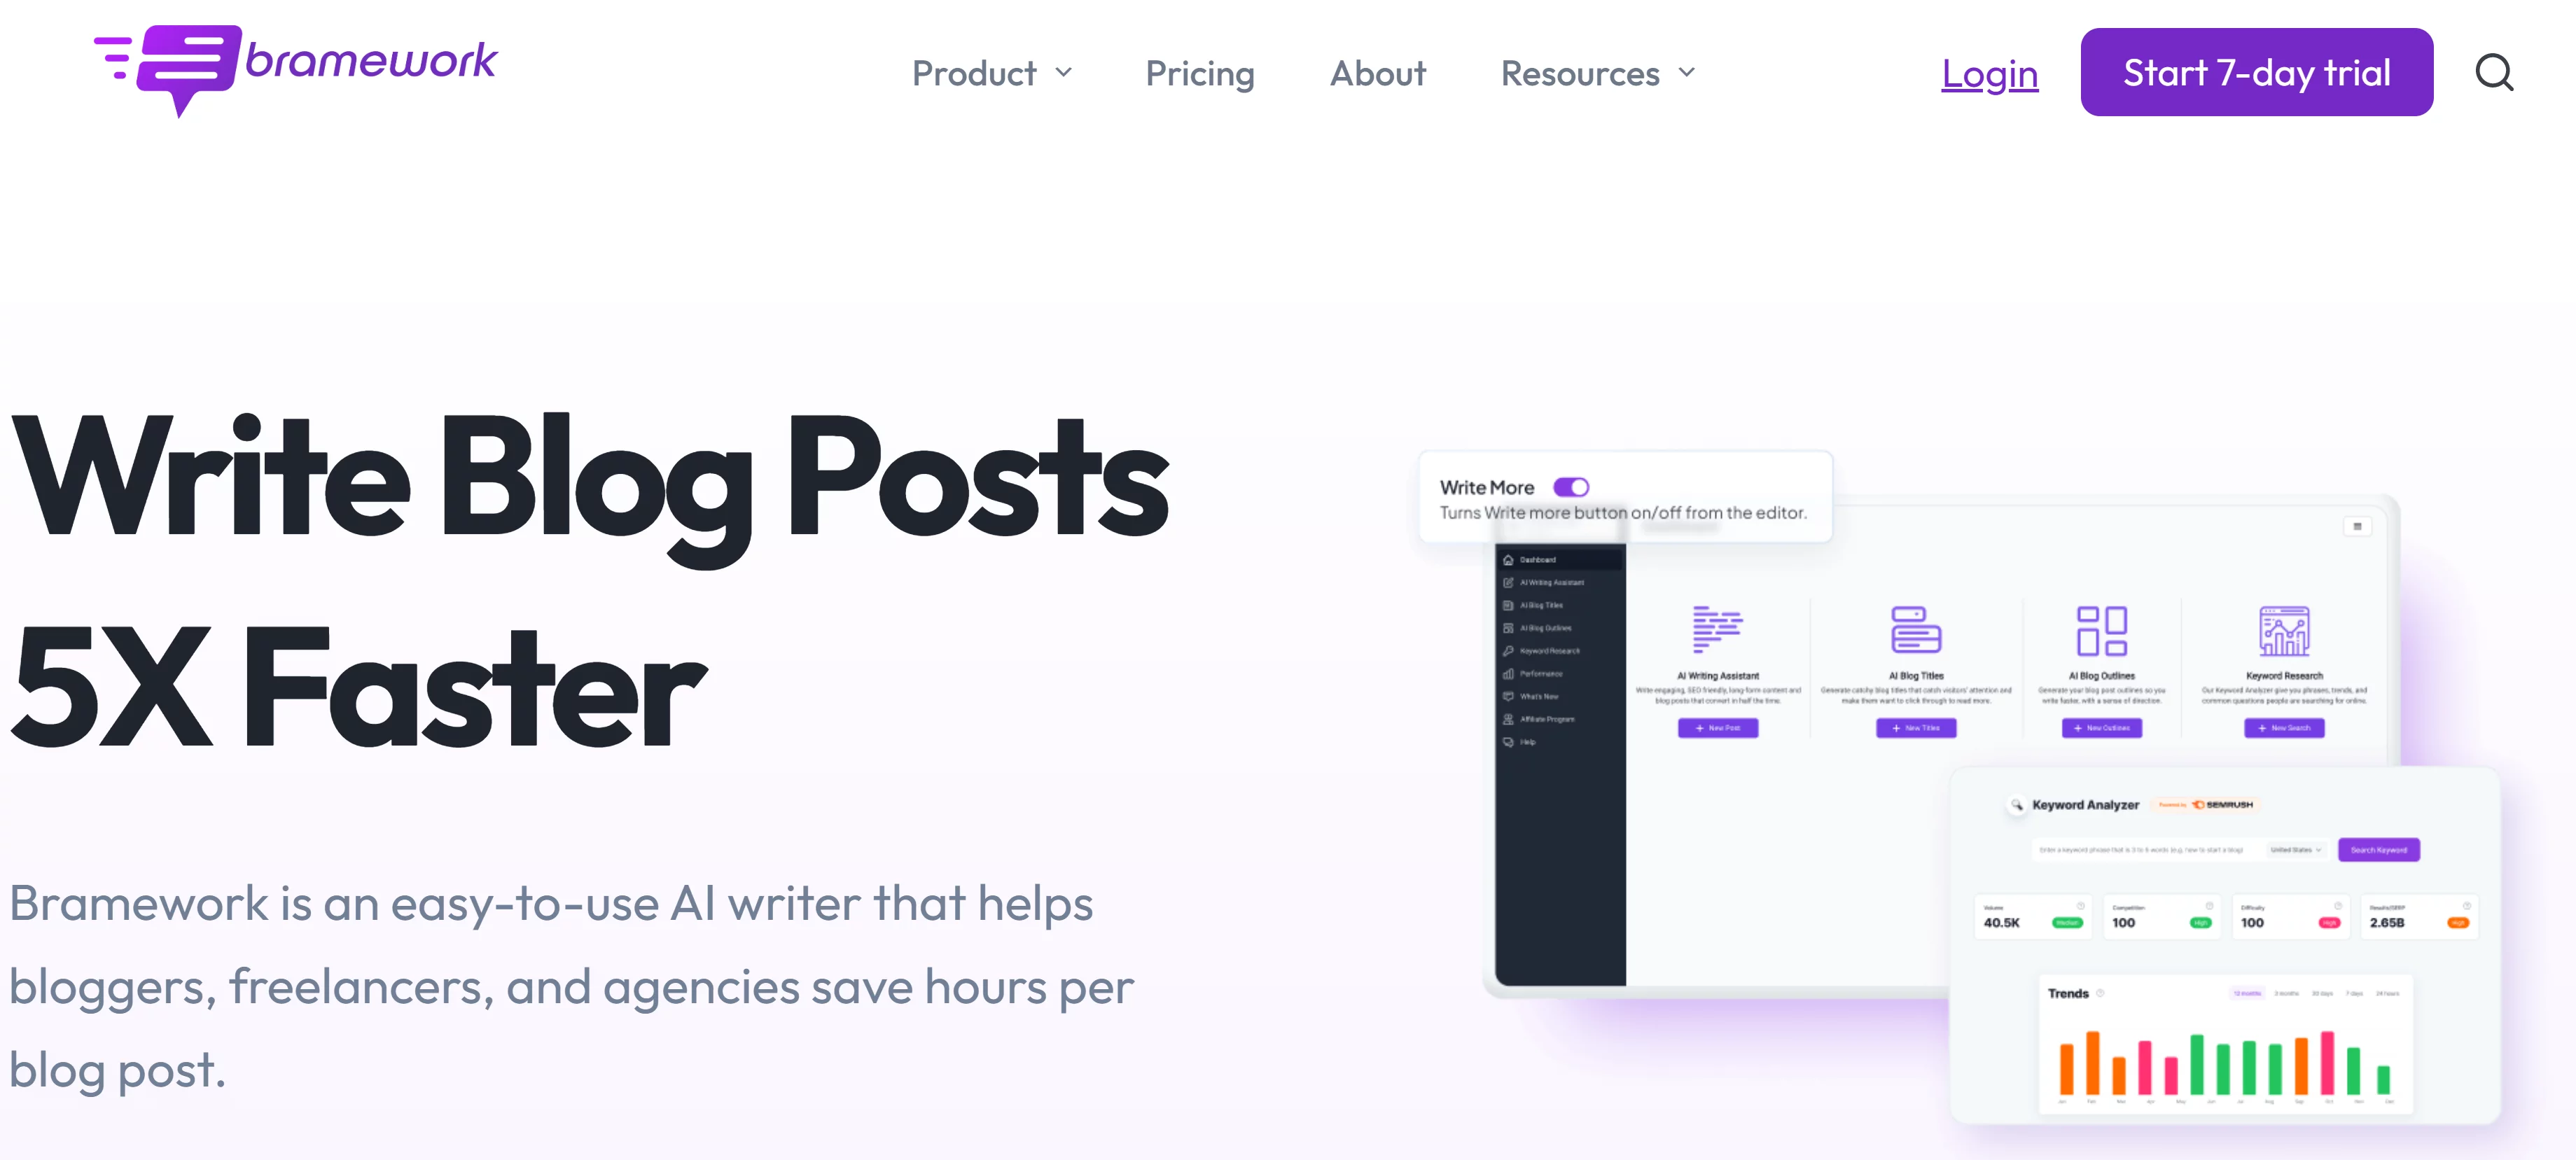  AI writer helps bloggers save hours/post; faster,